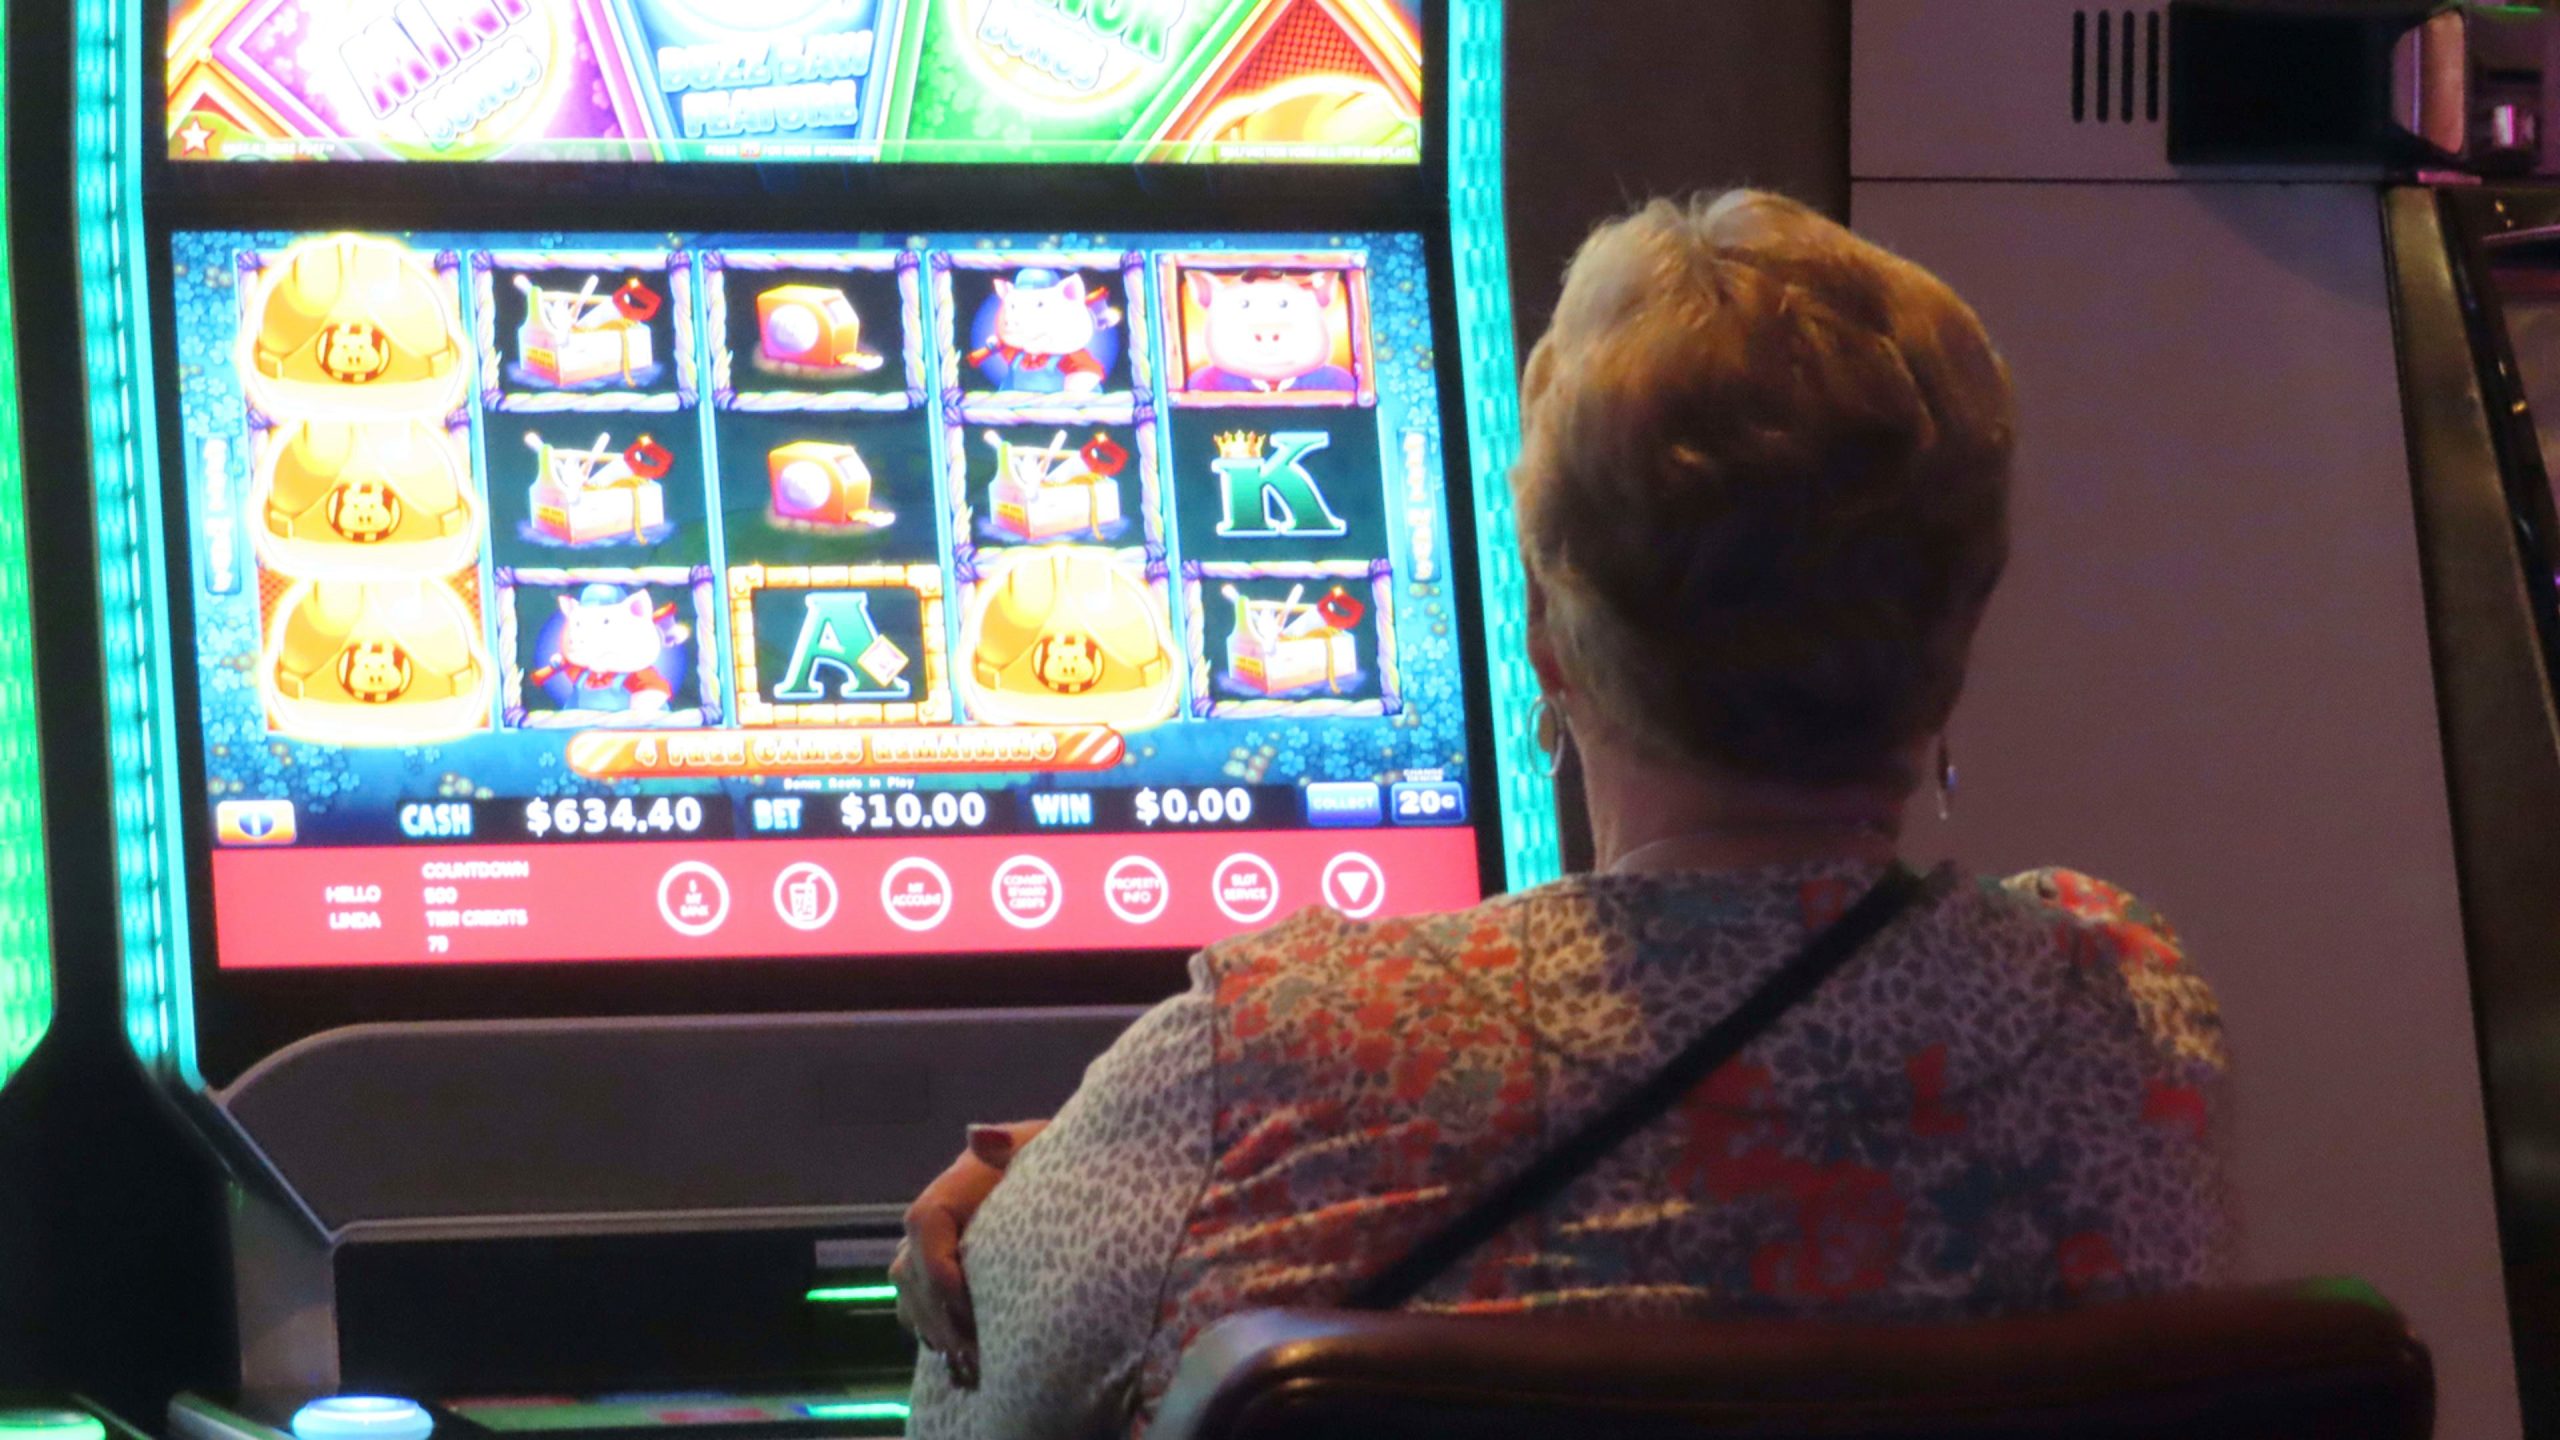 The future of gambling is online—but it will take time to get there